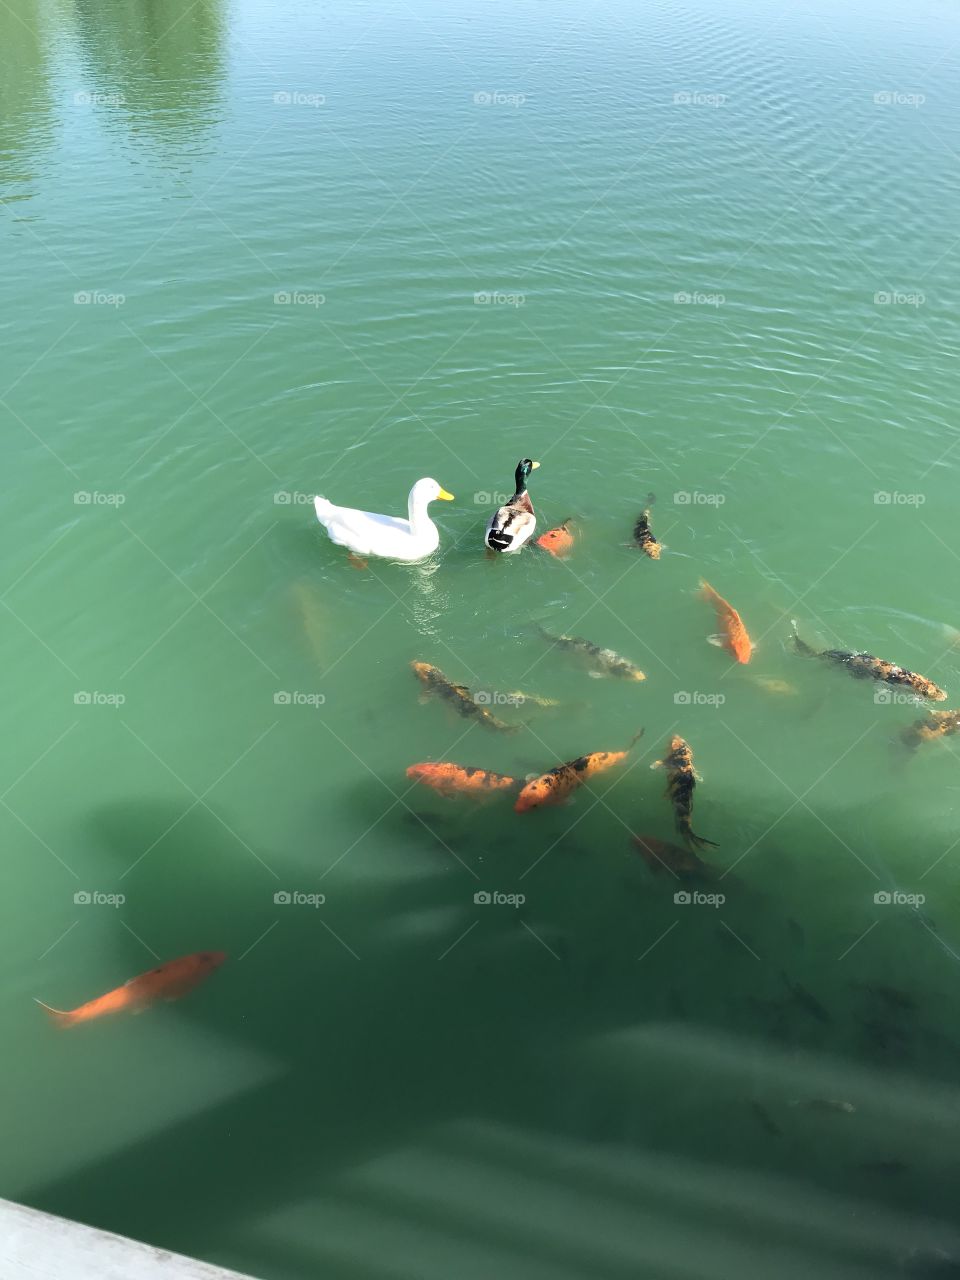 Duckies and fishies...oh my!